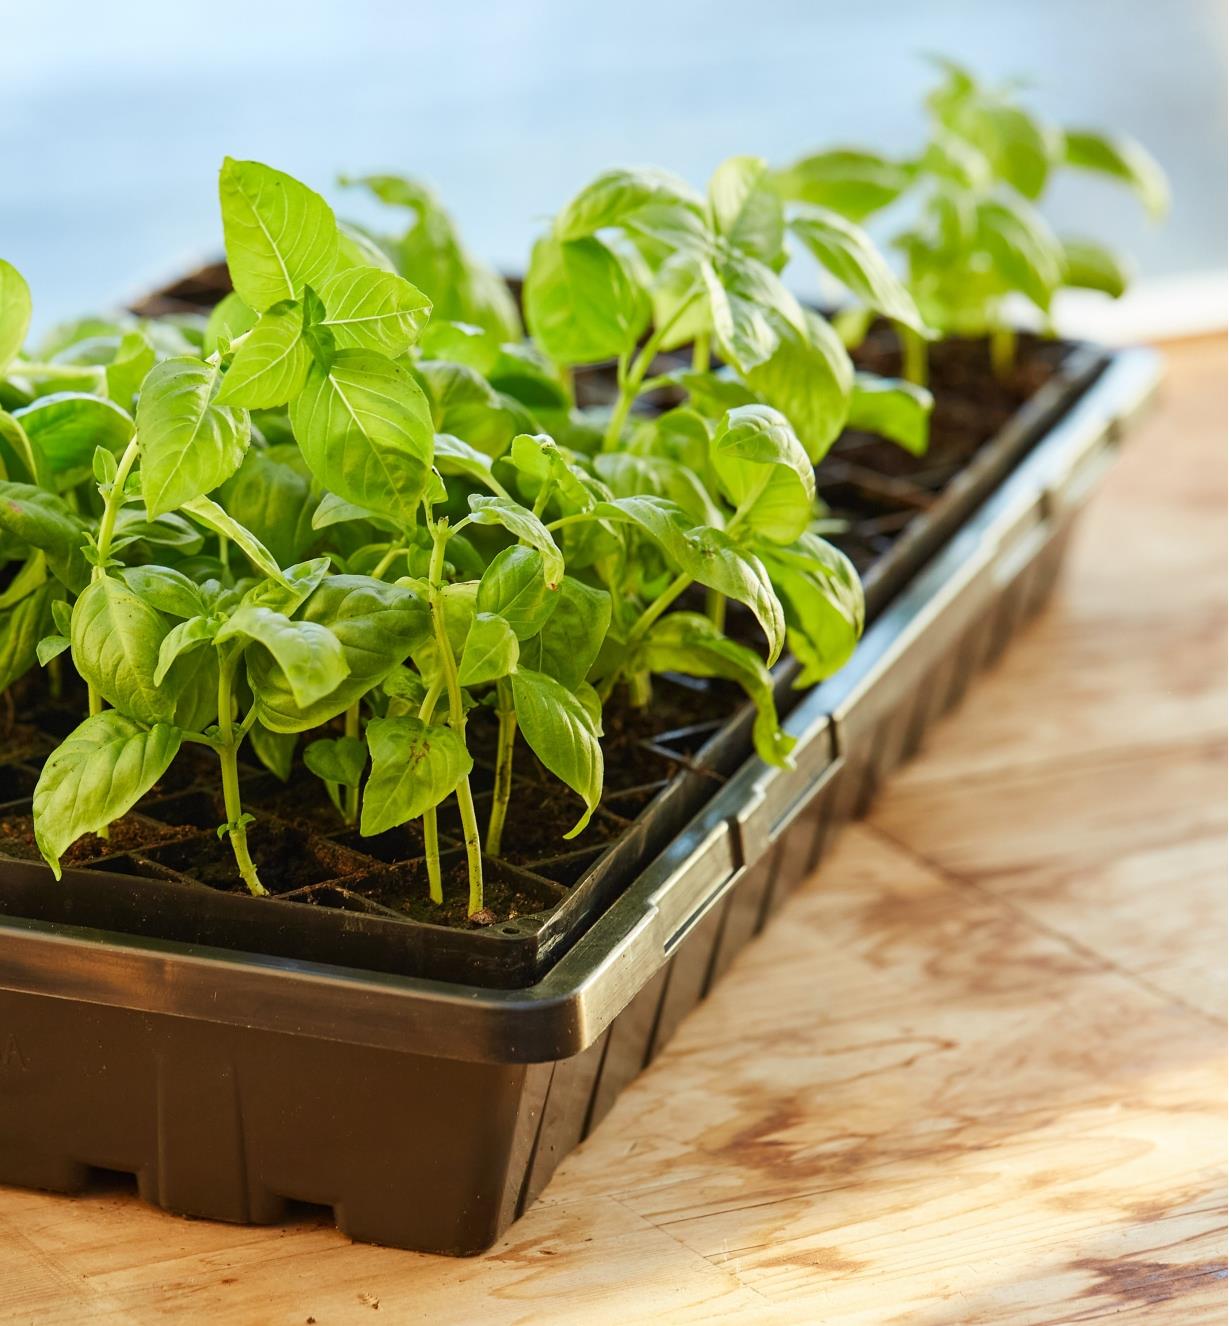 A 72-cell seed starter with growing seedlings resting in a propagation tray